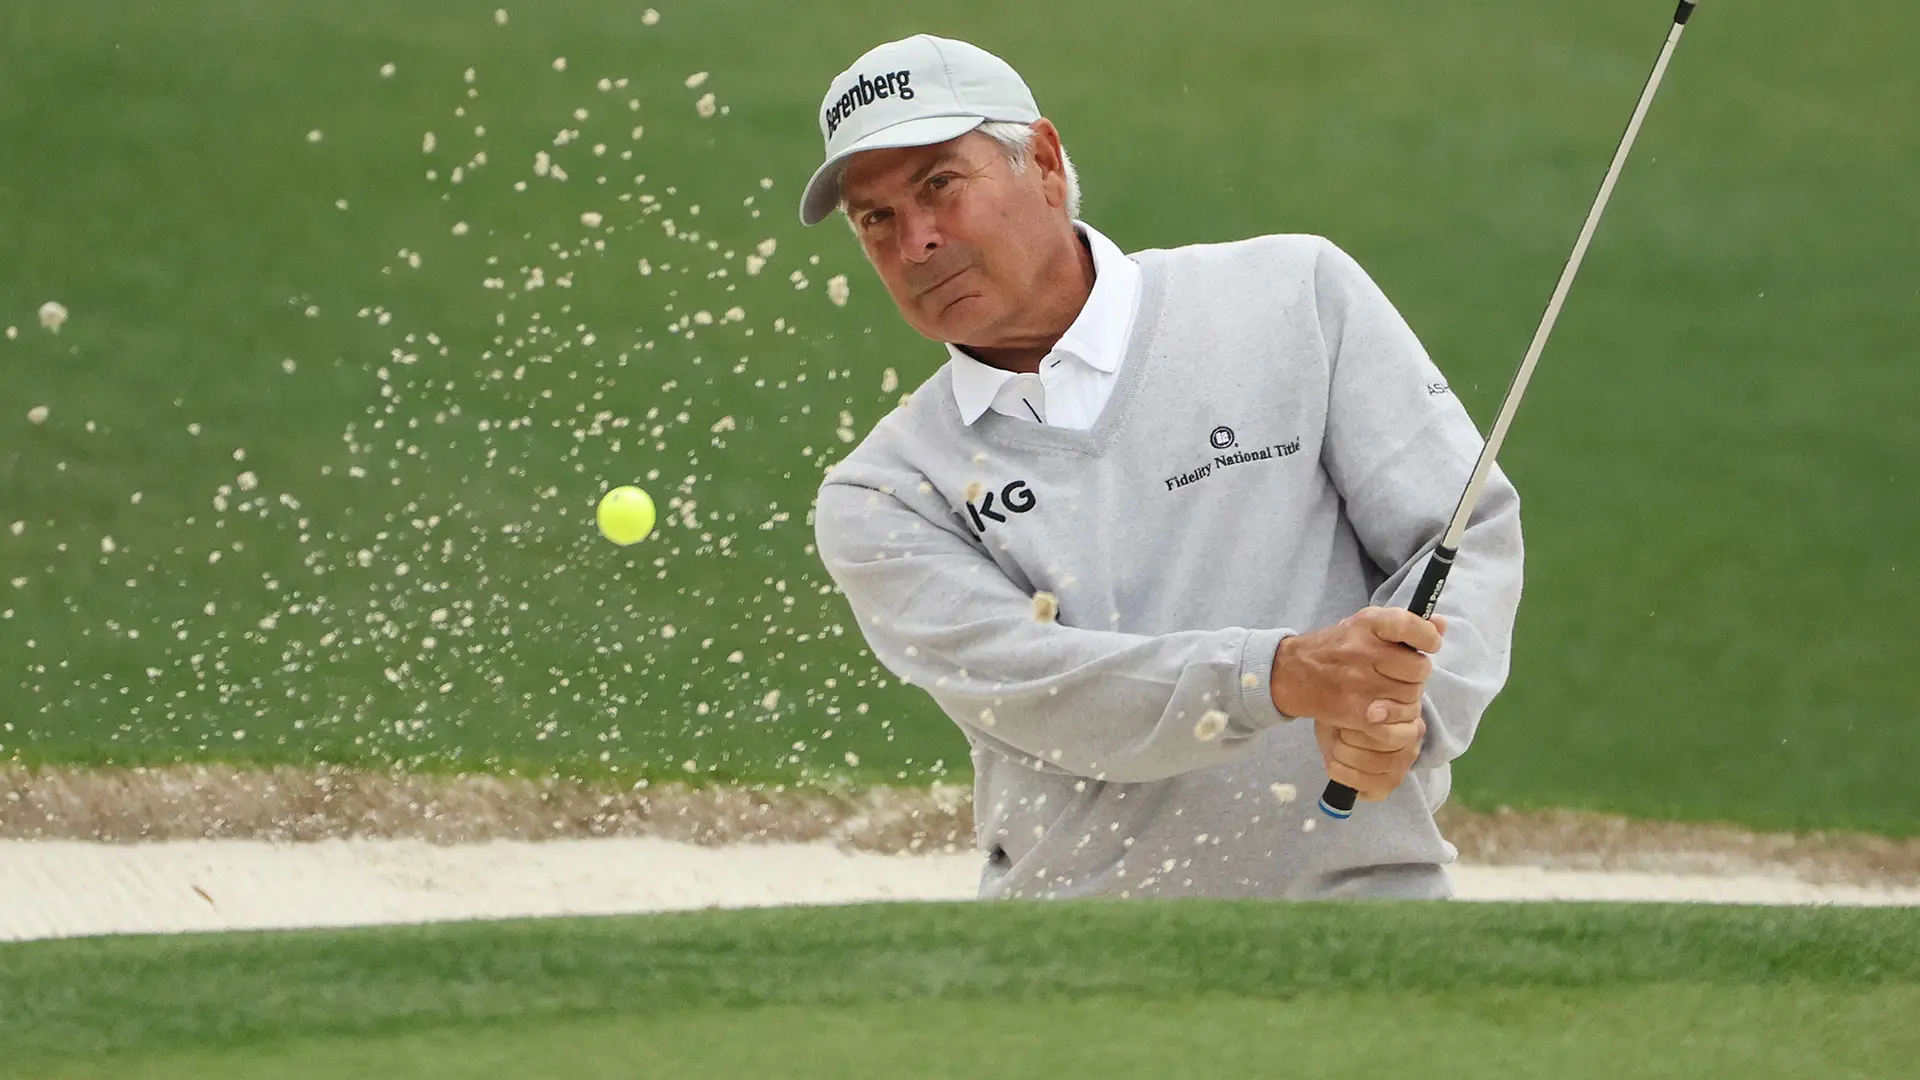 Fred Couples Net Worth is $120 million and their Biography